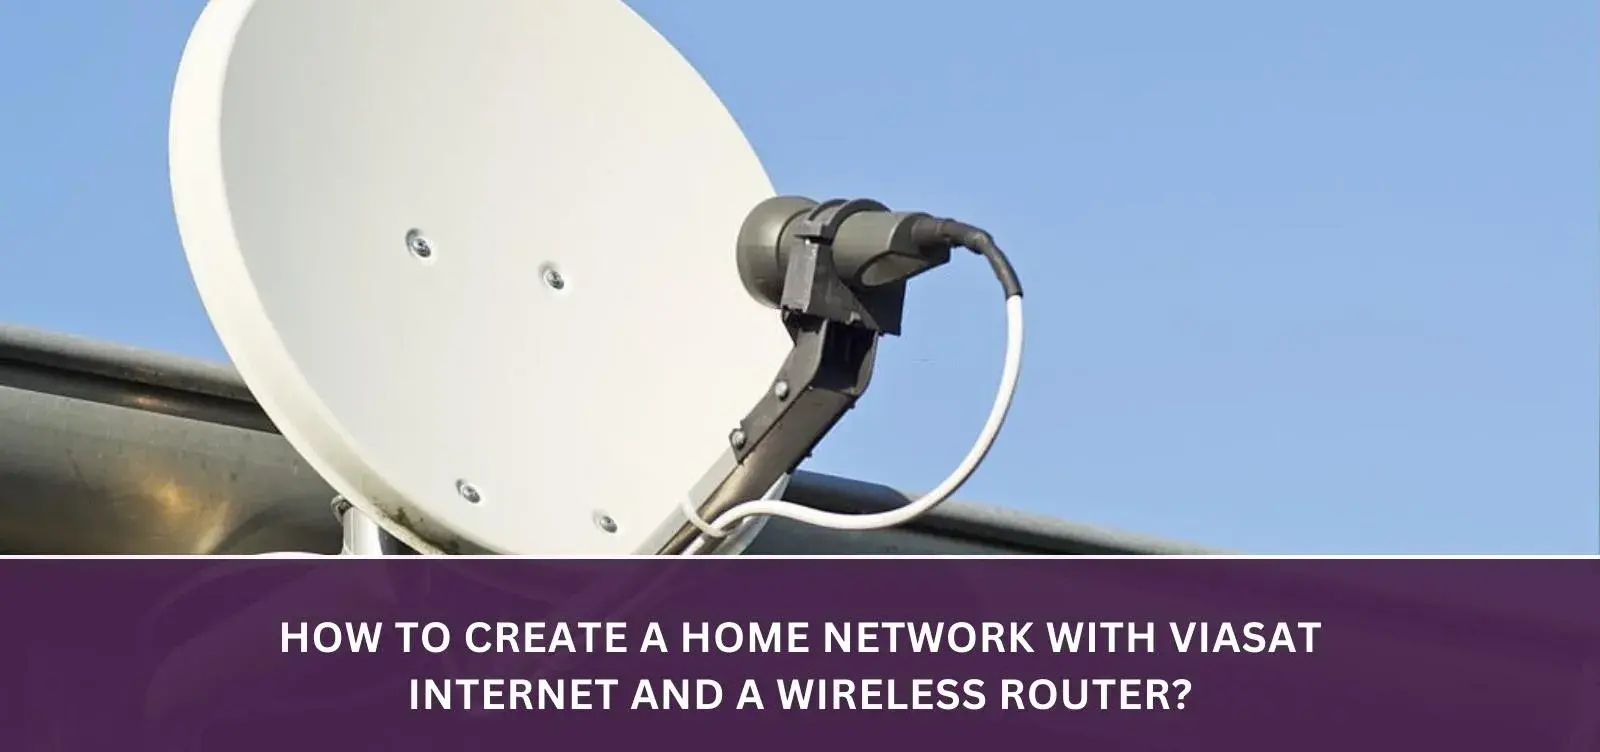 How to create a home network with Viasat Internet and a wireless router?